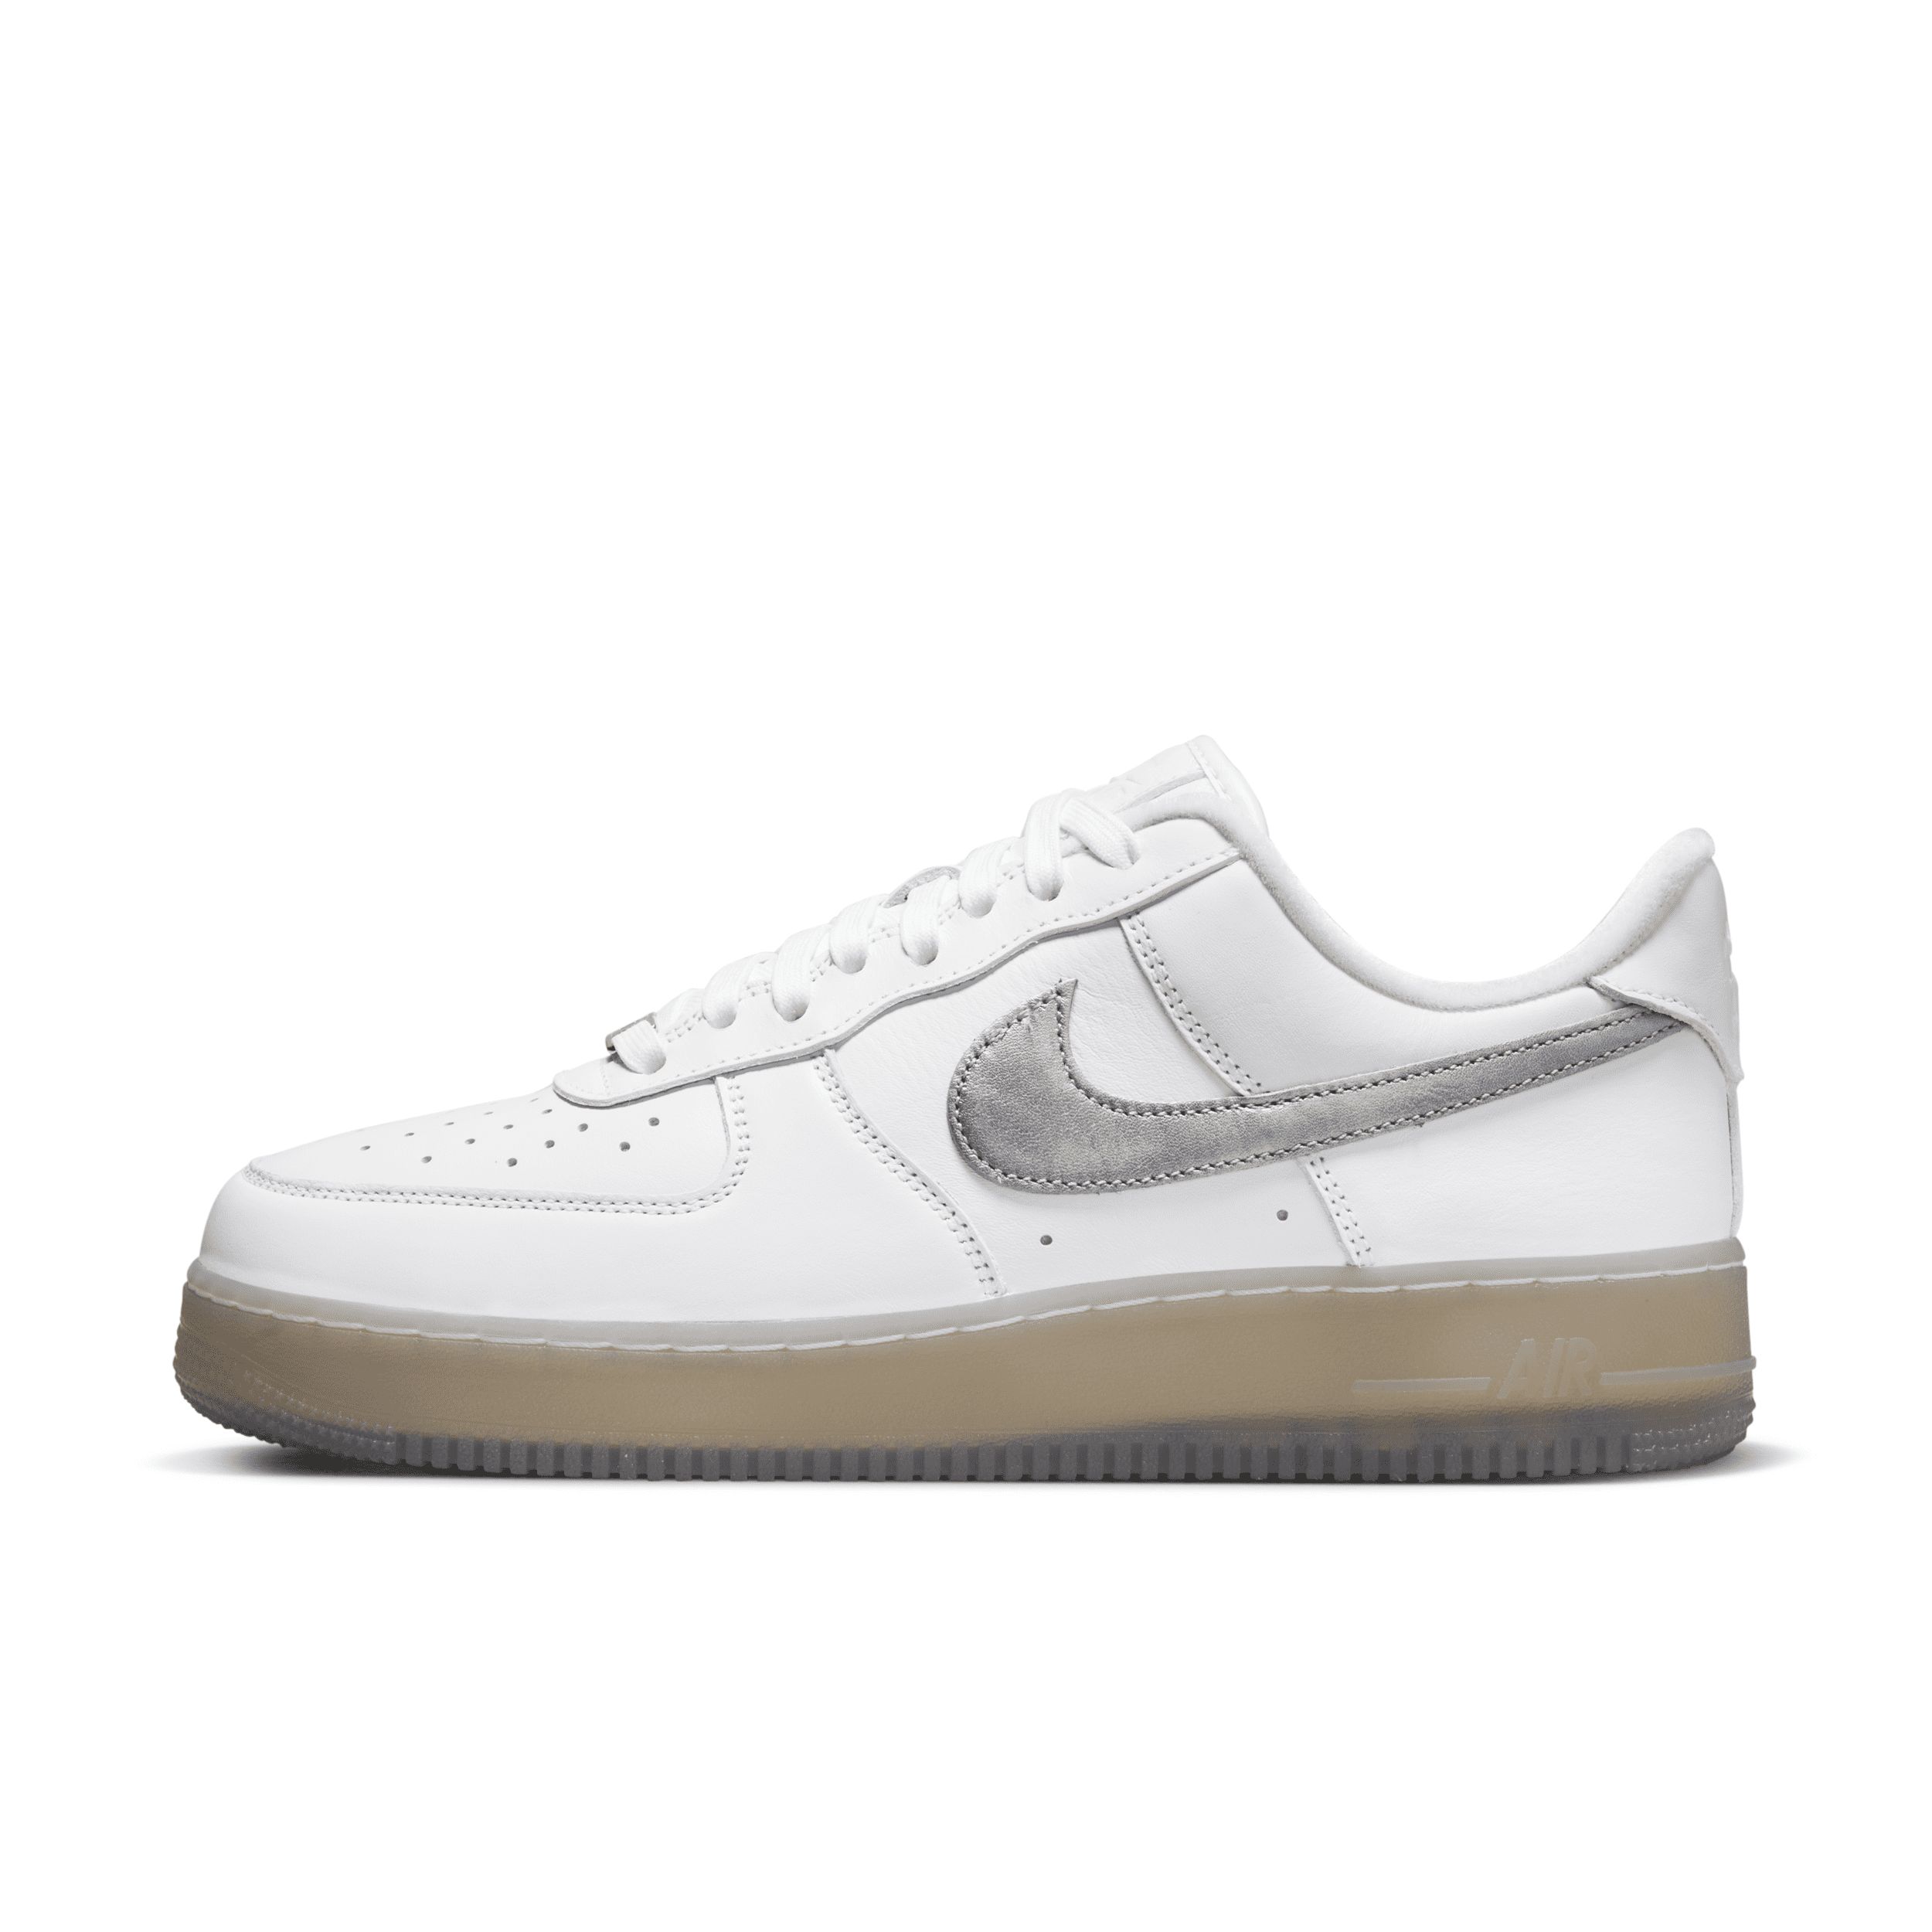 Nike Men's Air Force 1 '07 Premium Shoes in White, Size: 11 | DX3945-100 | Nike (US)